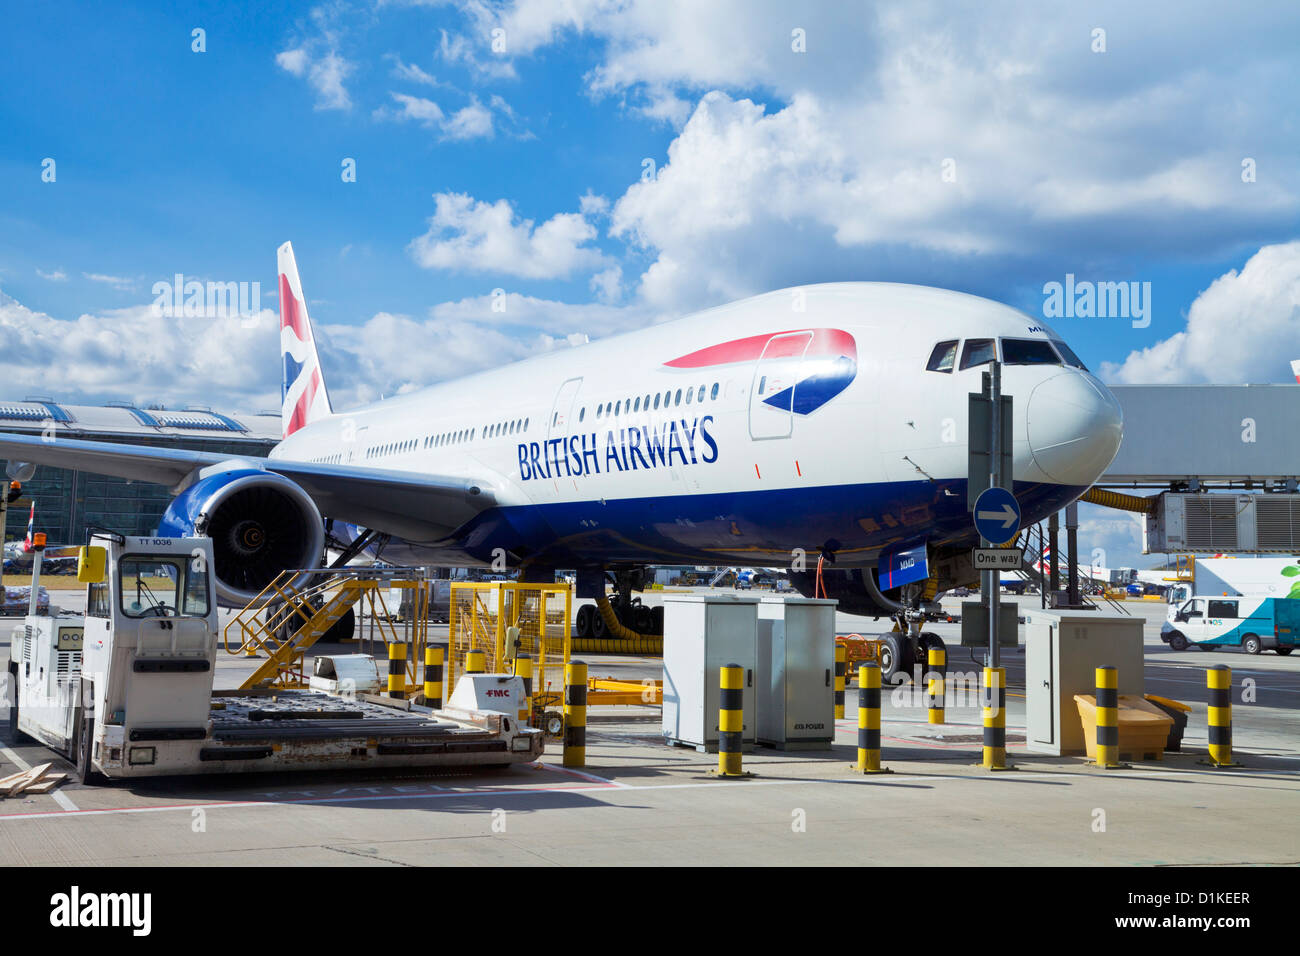 british airways plane ready for boarding being loaded with luggage and meals Heathrow Airport Terminal 5 London UK GB EU Europe Stock Photo